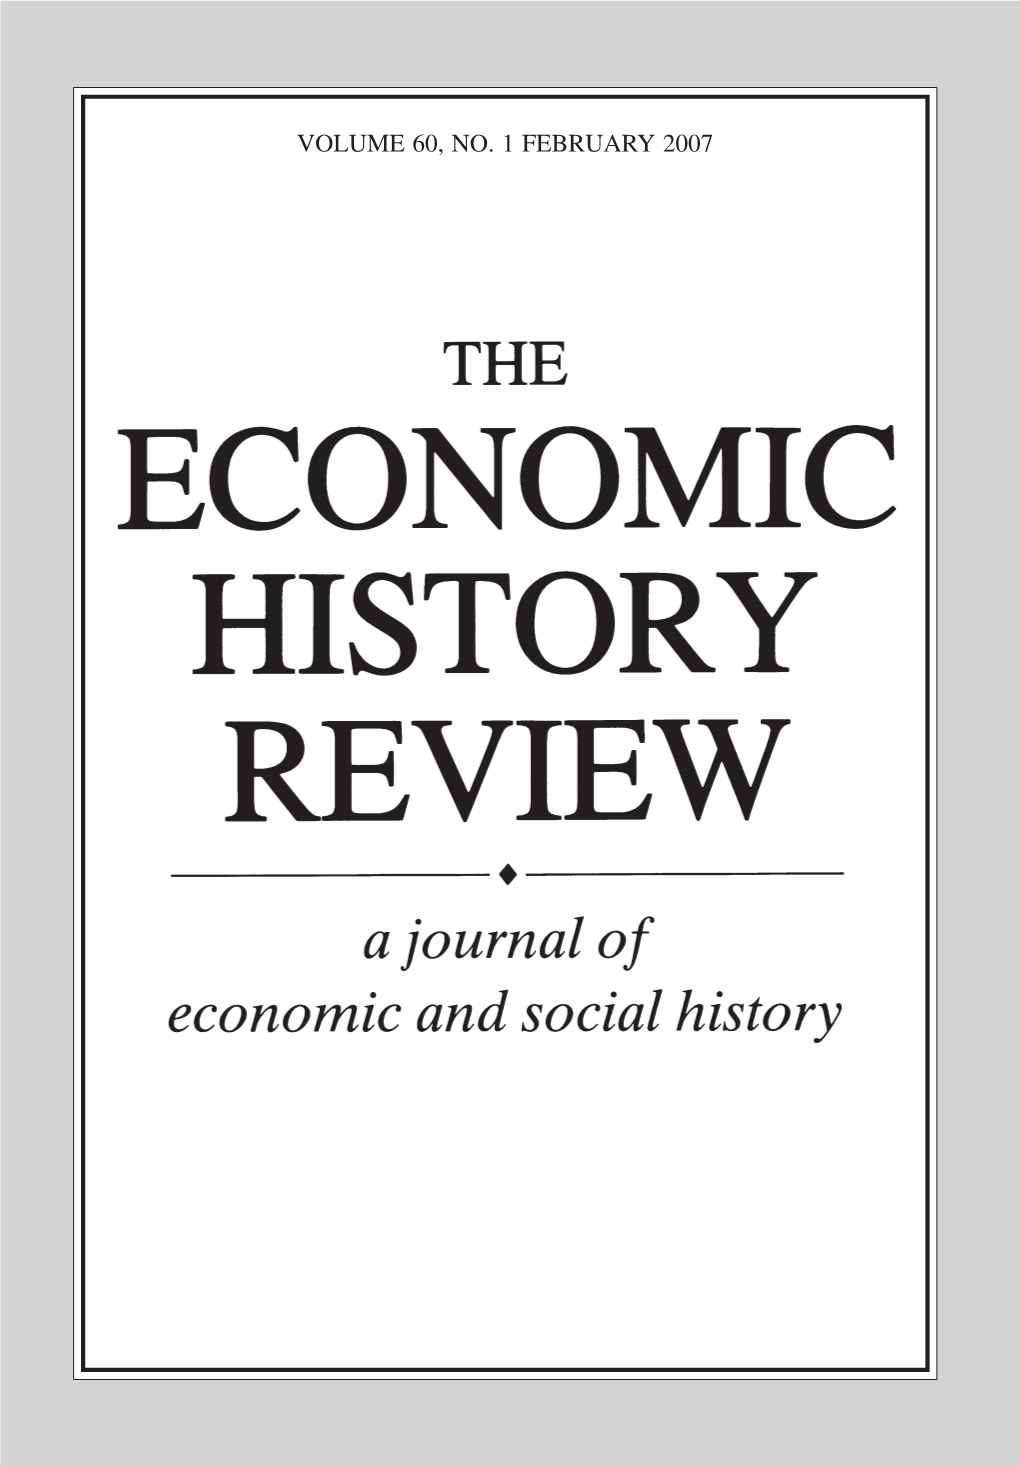 V Ol. 60, No. 1 the ECONOMIC HIST OR Y REVIEW February 2007